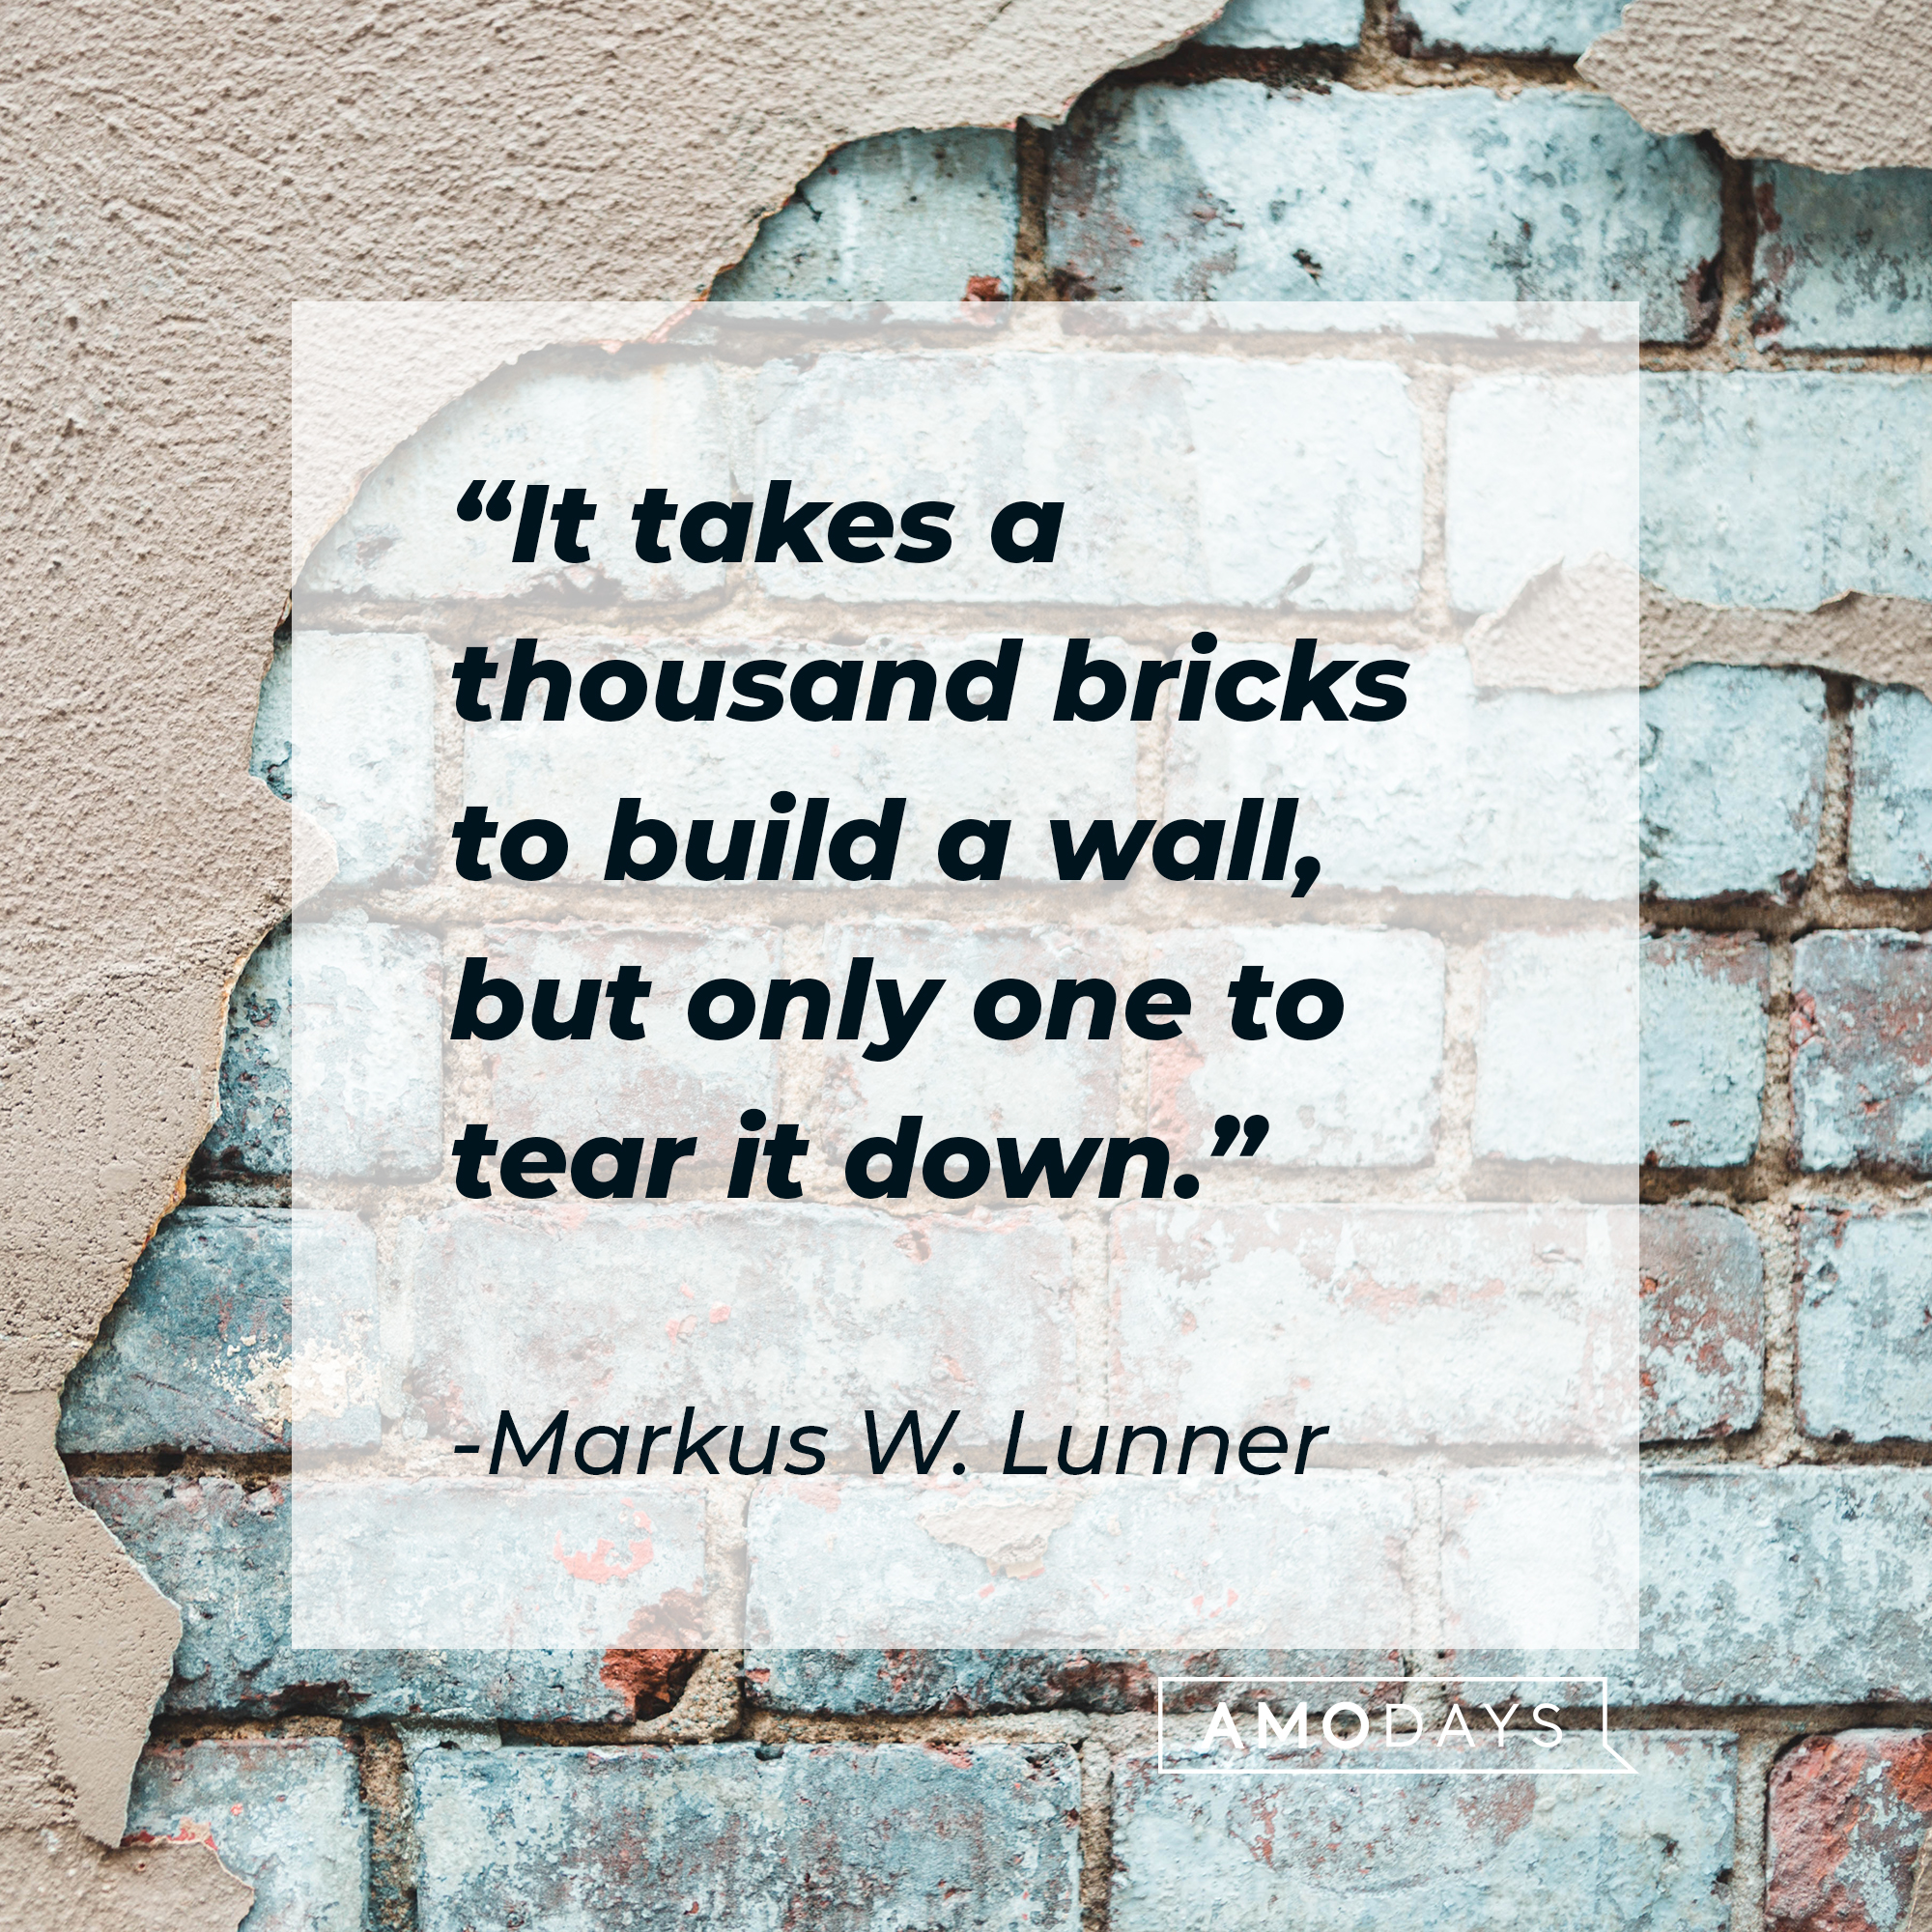 Markus W. Lunner's quote: "It takes a thousand bricks to build a wall, but only one to tear it down." | Source: Unsplash